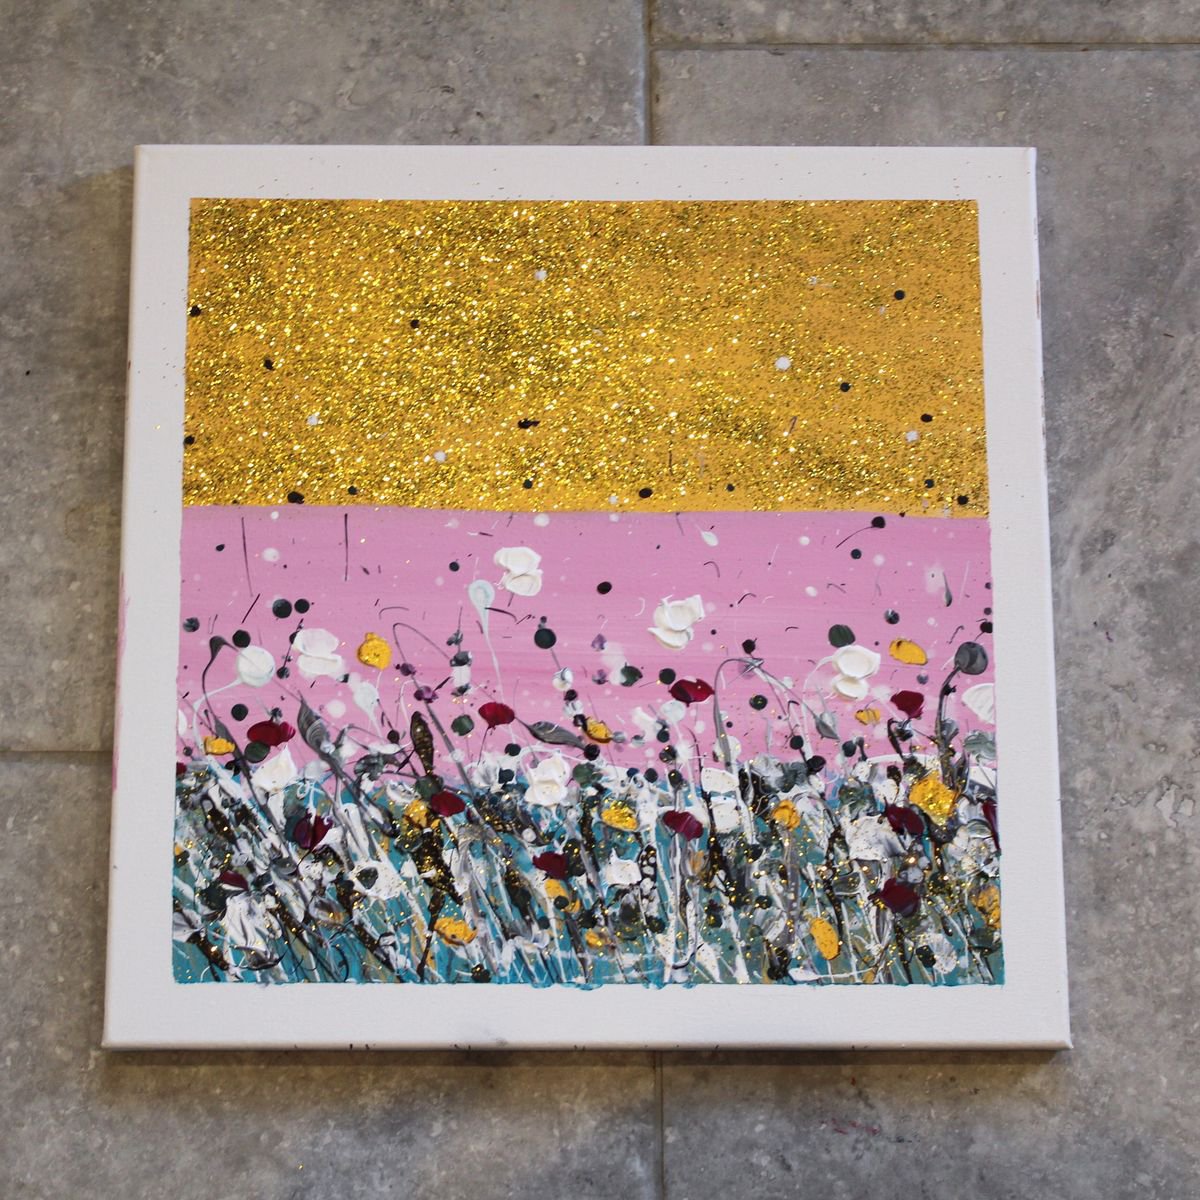 The Gold Sky Shines by Charlotte Anna Reed HAPPY ART